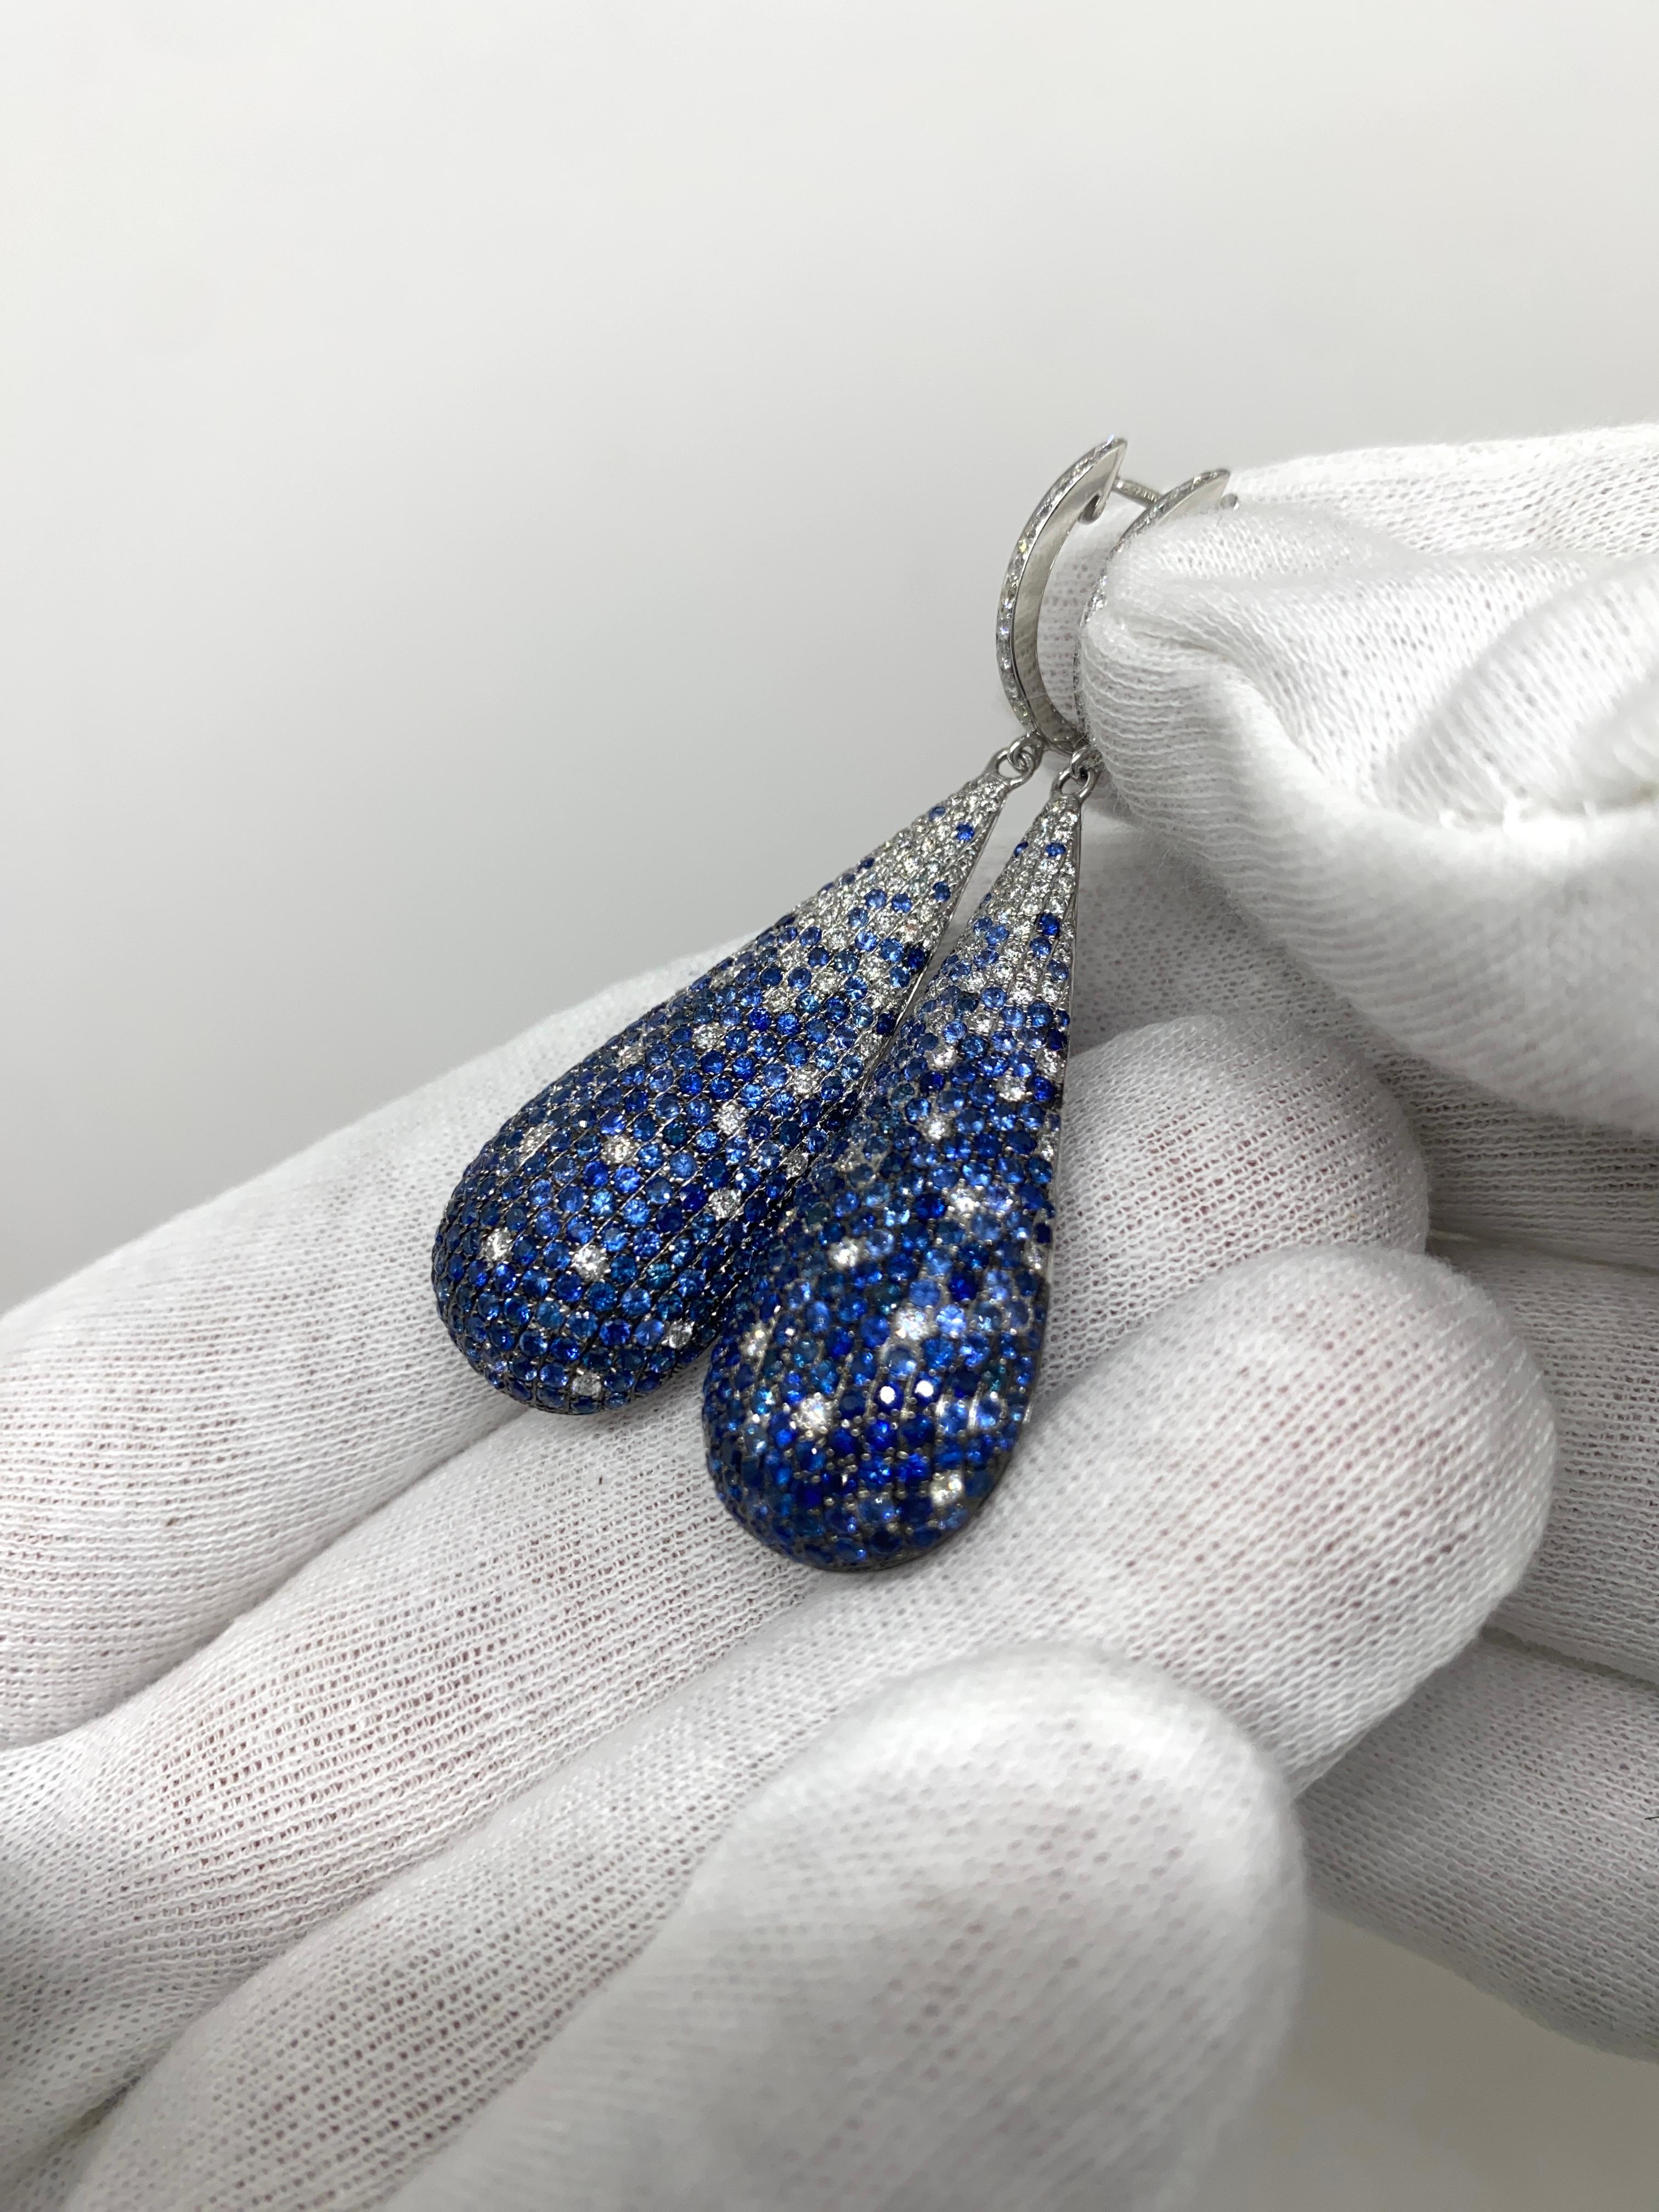 Dangling earrings made of 18kt white gold with natural brilliant-cut blue sapphires for ct.5.62 and natural brilliant-cut white diamonds for ct.1.42

Welcome to our jewelry collection, where every piece tells a story of timeless elegance and